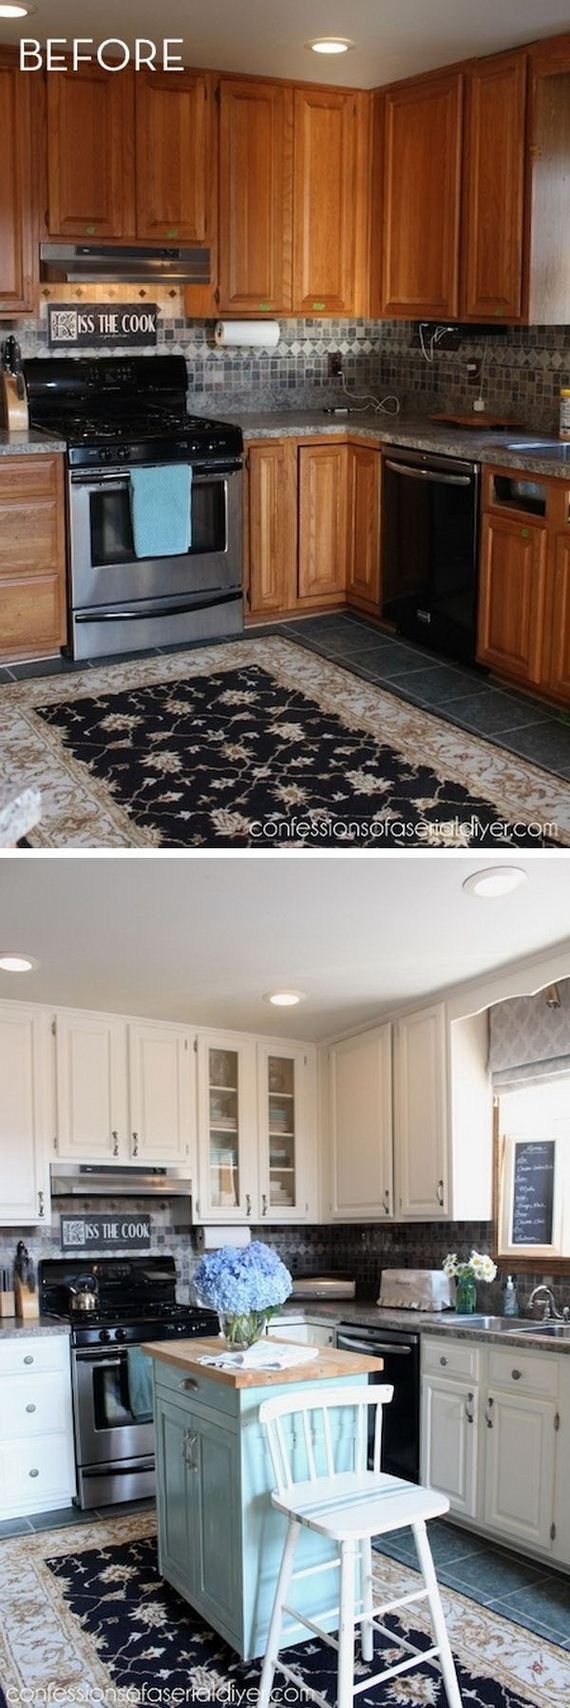 19-before-after-kitchen-makeover